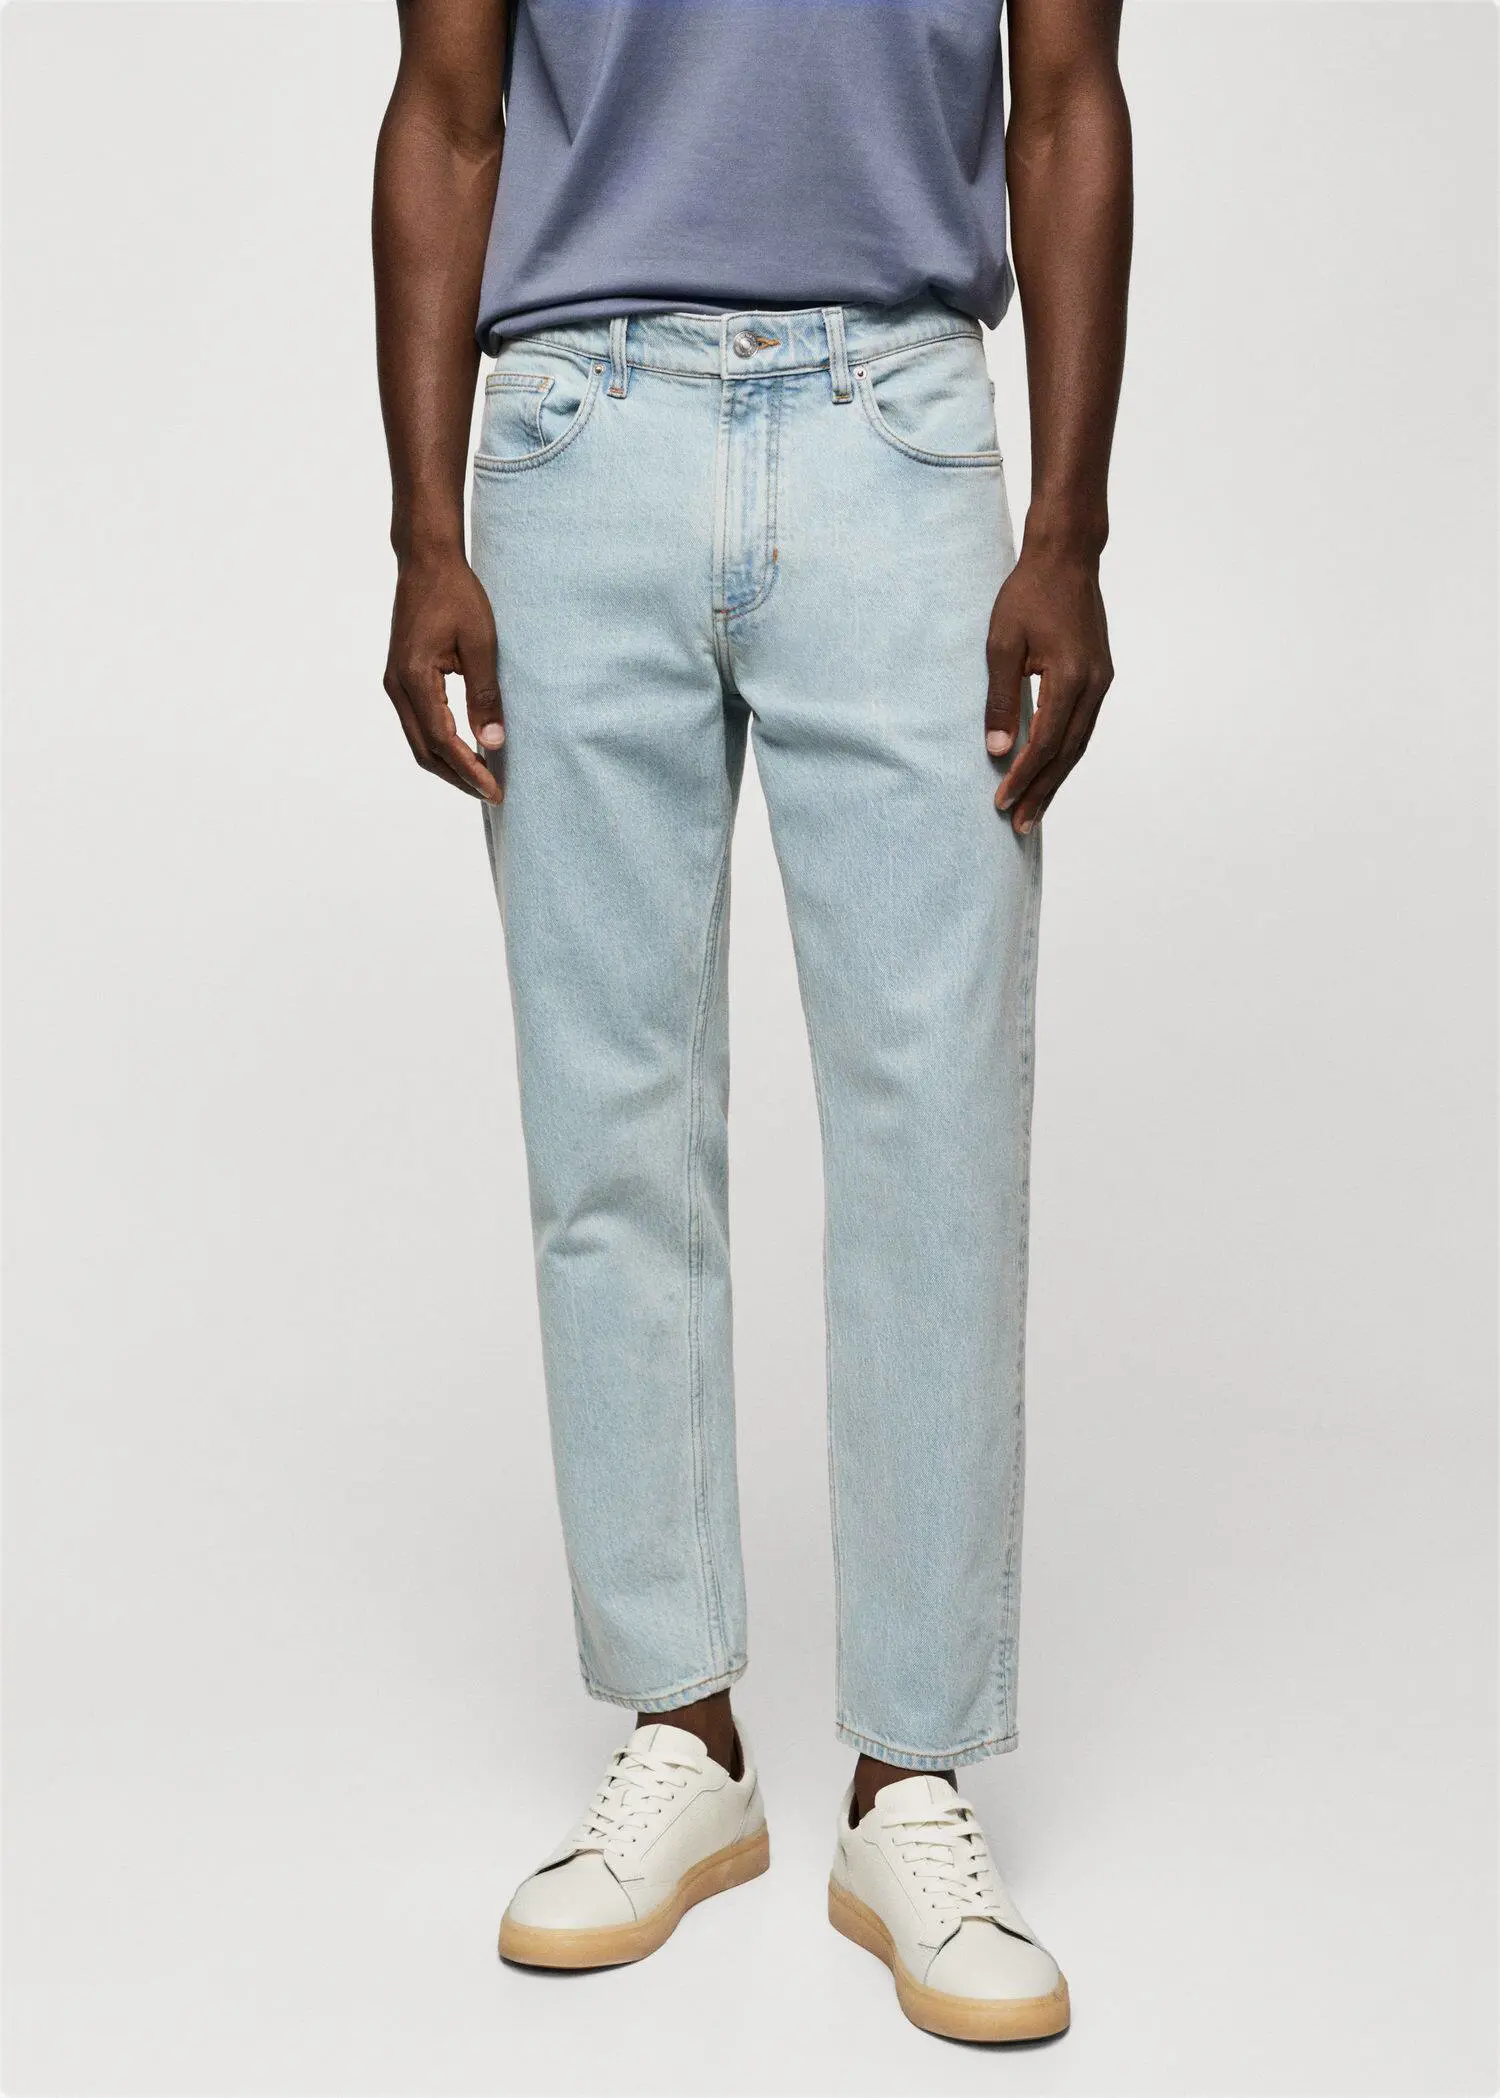 Mango Ben tapered cropped jeans. a man wearing light blue jeans and white sneakers. 